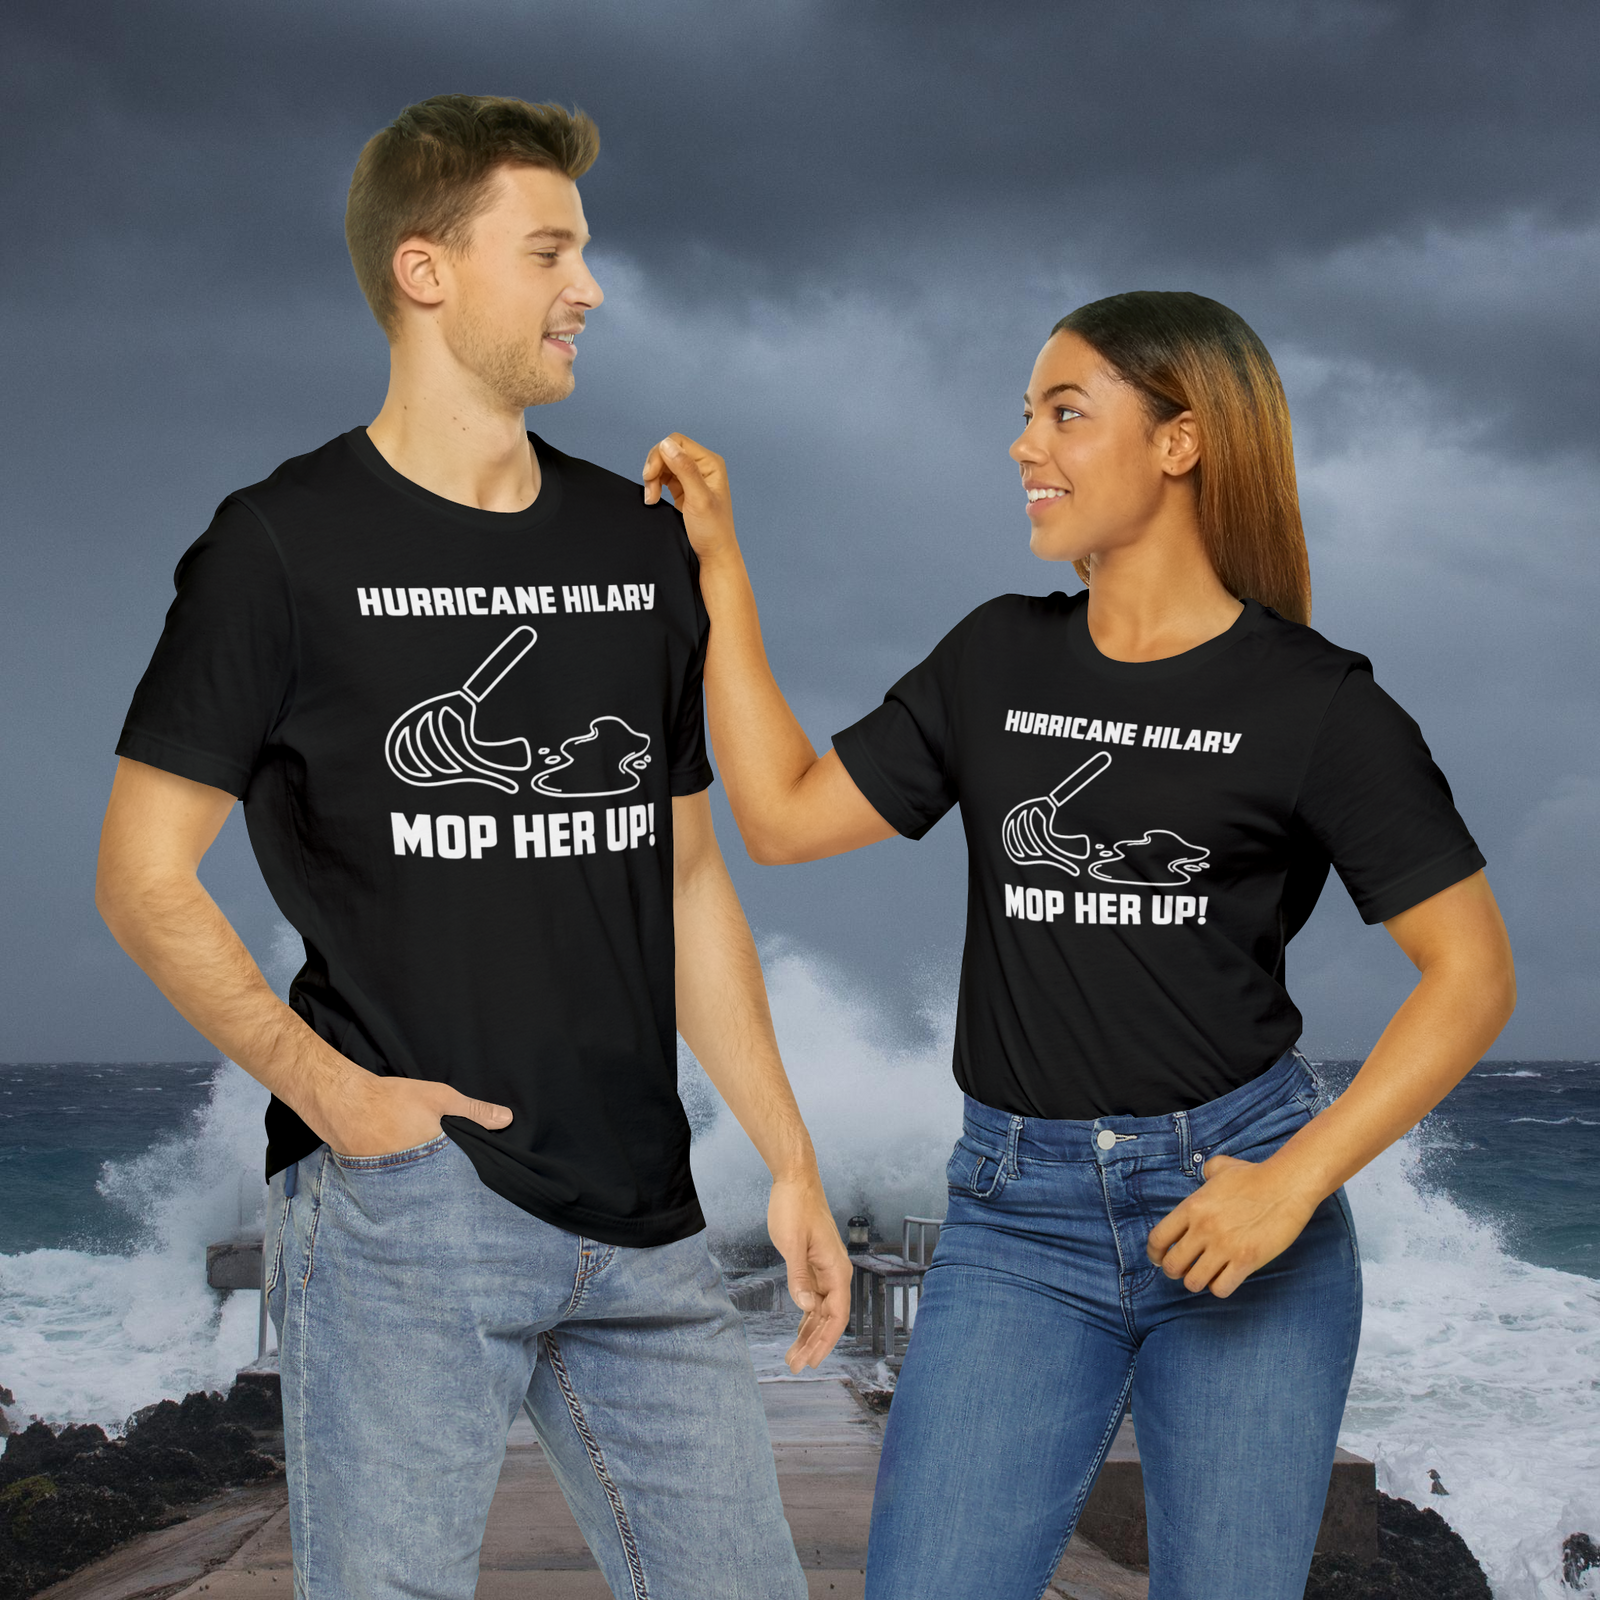 Hurricane Hilary "Mop Her Up!" T-Shirt: A Storm of Style